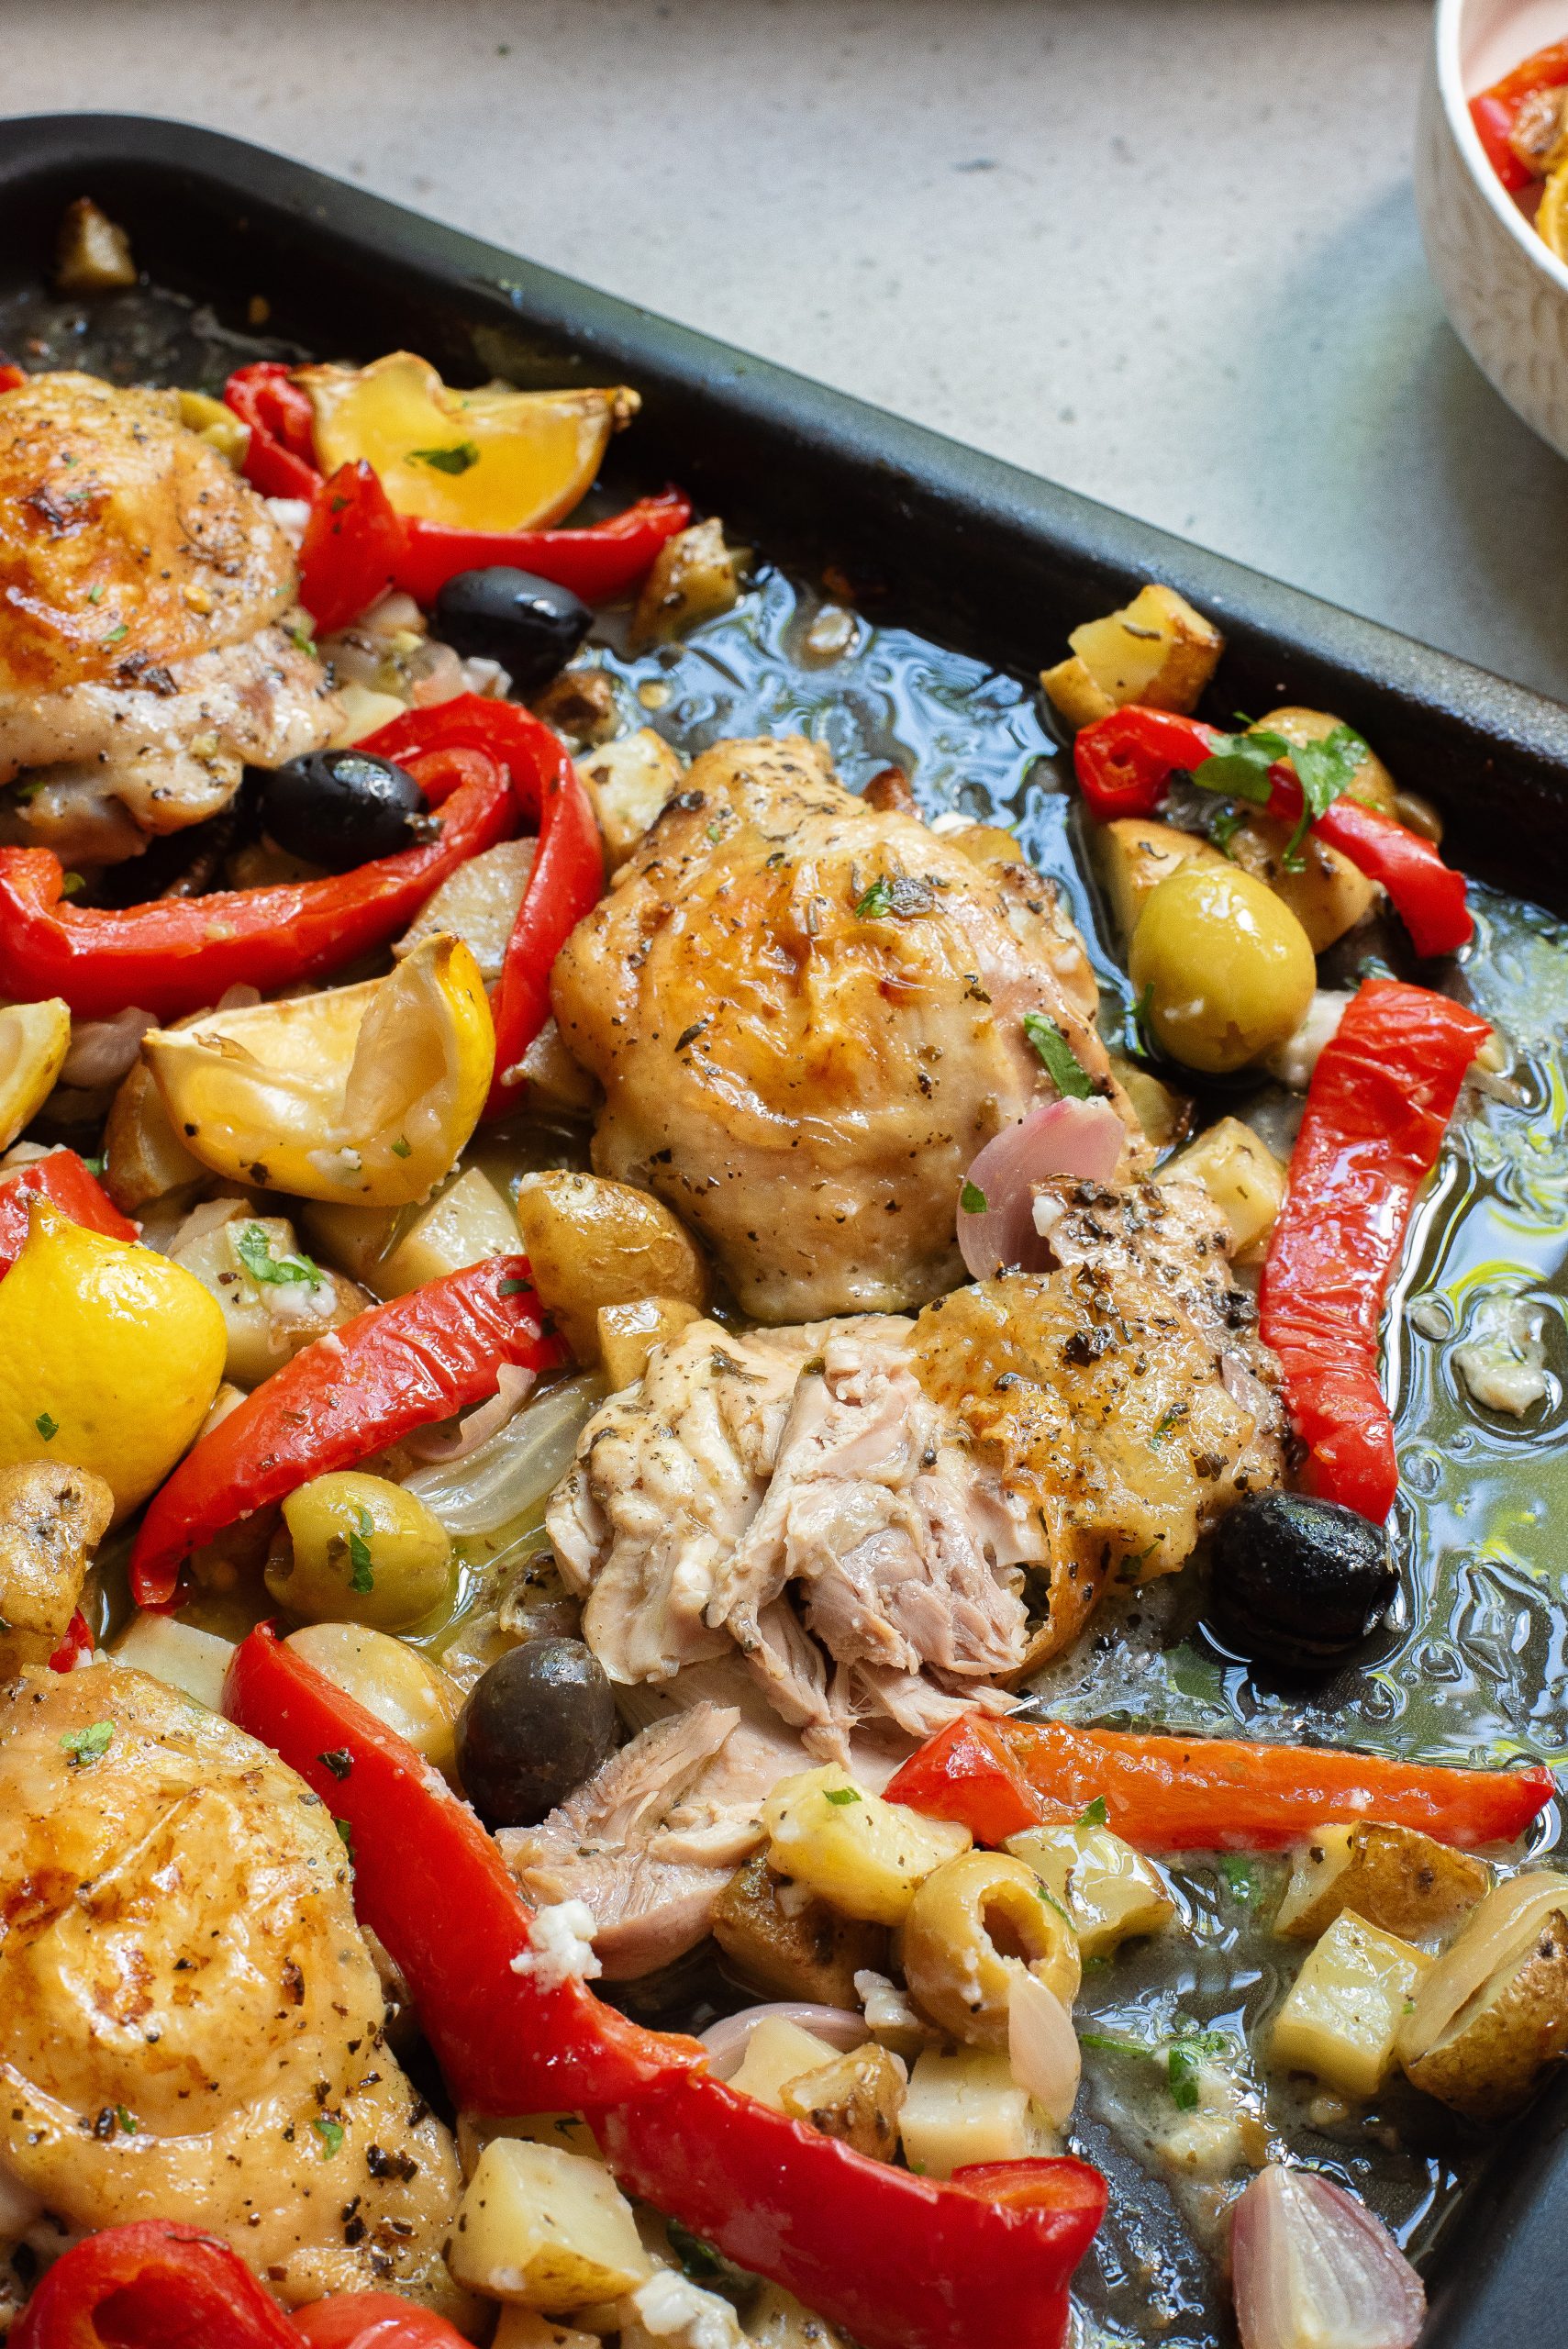 Roasted chicken thighs and mediterranean vegetables on a baking sheet.